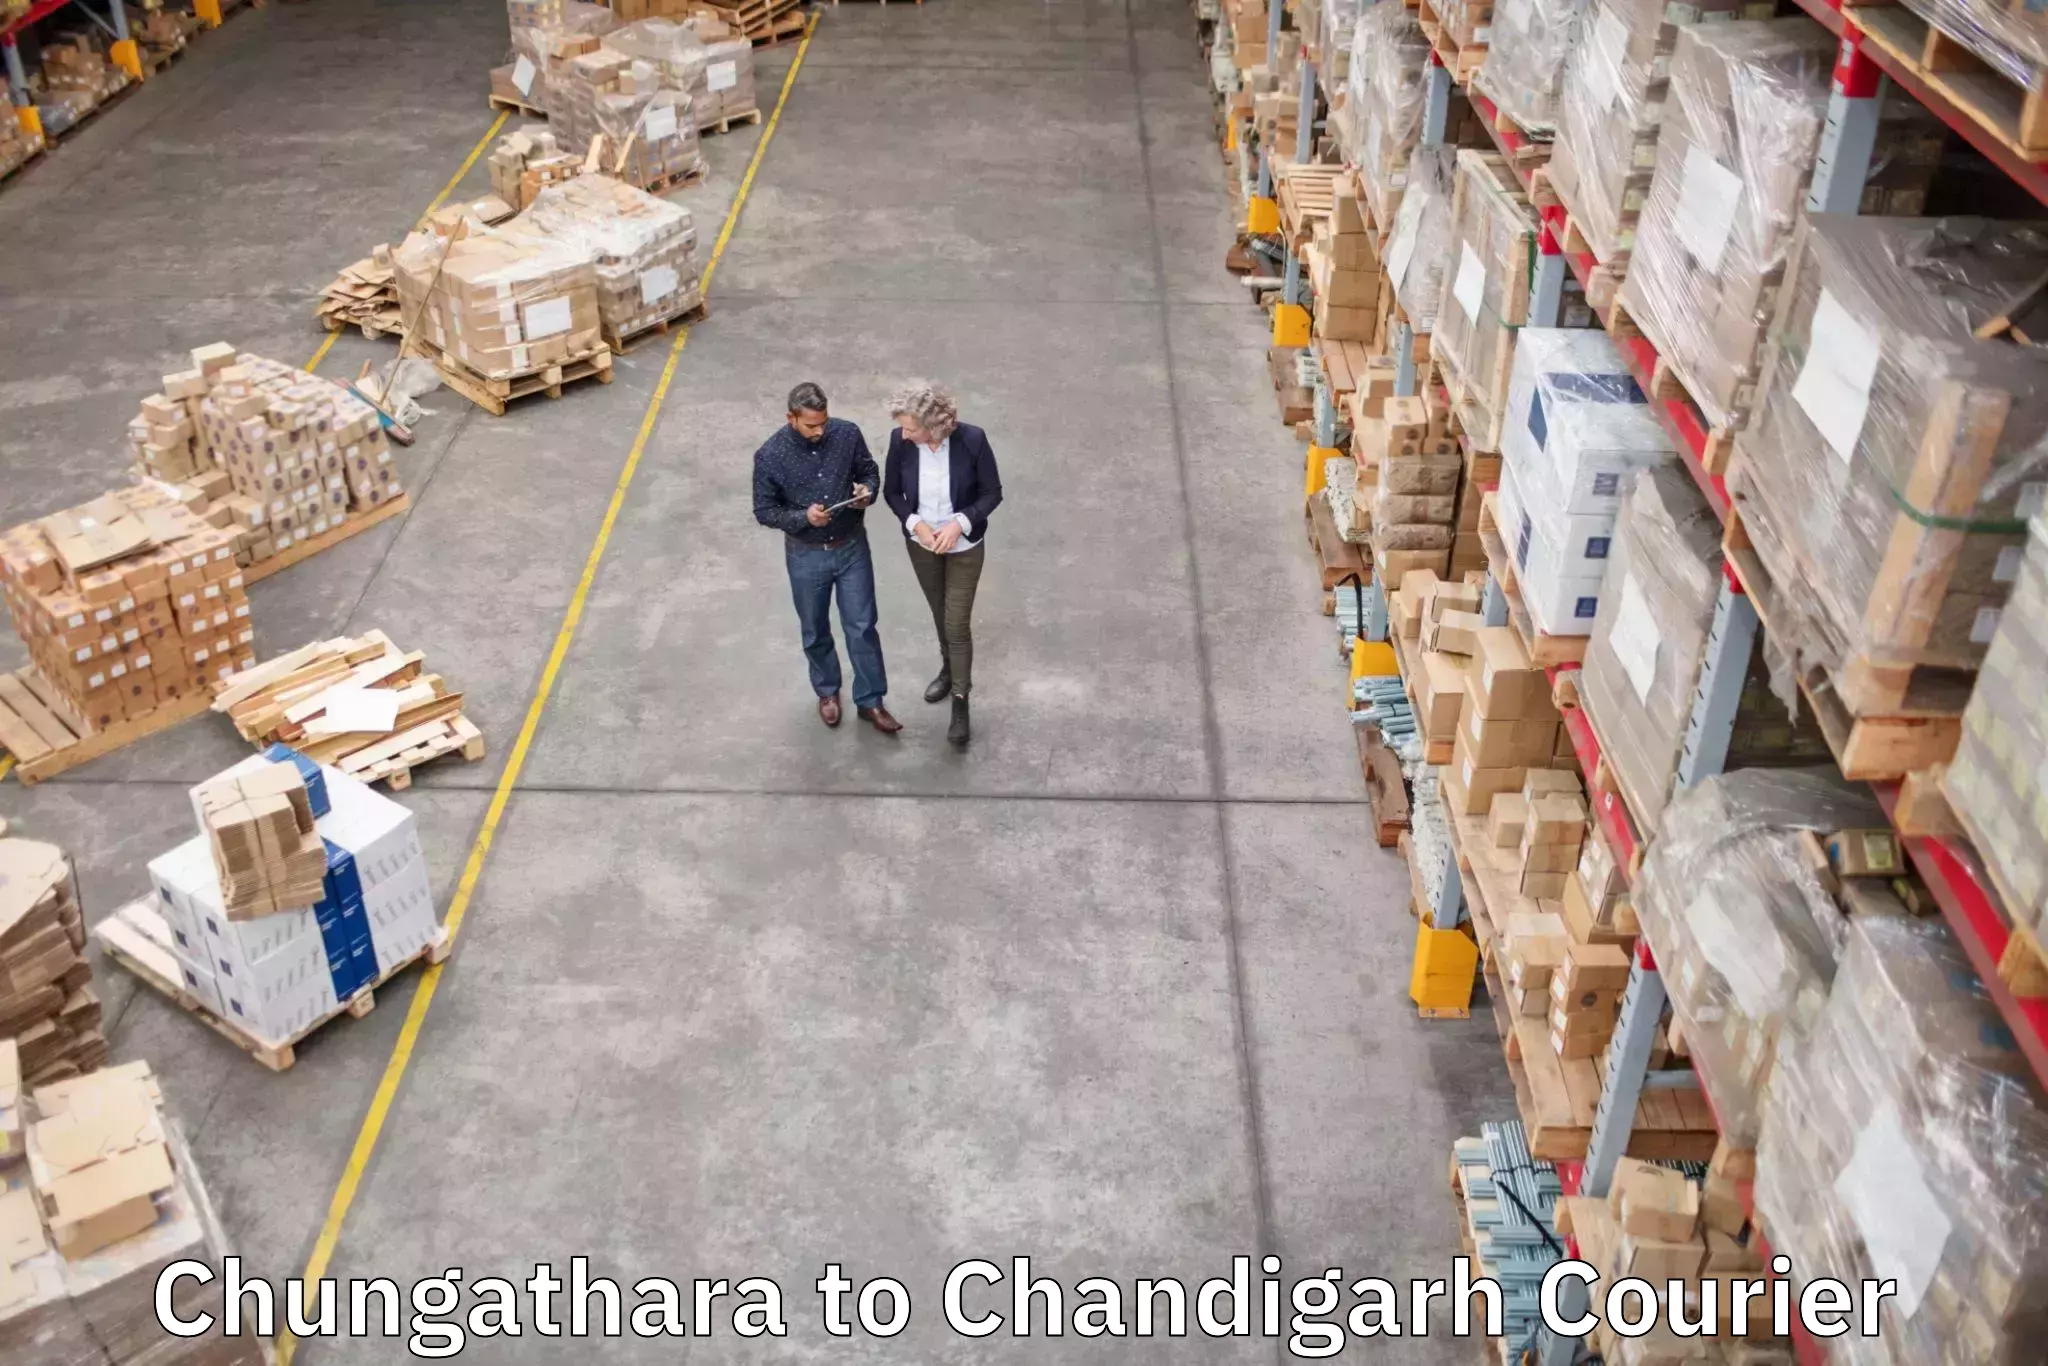 Luggage dispatch service in Chungathara to Chandigarh